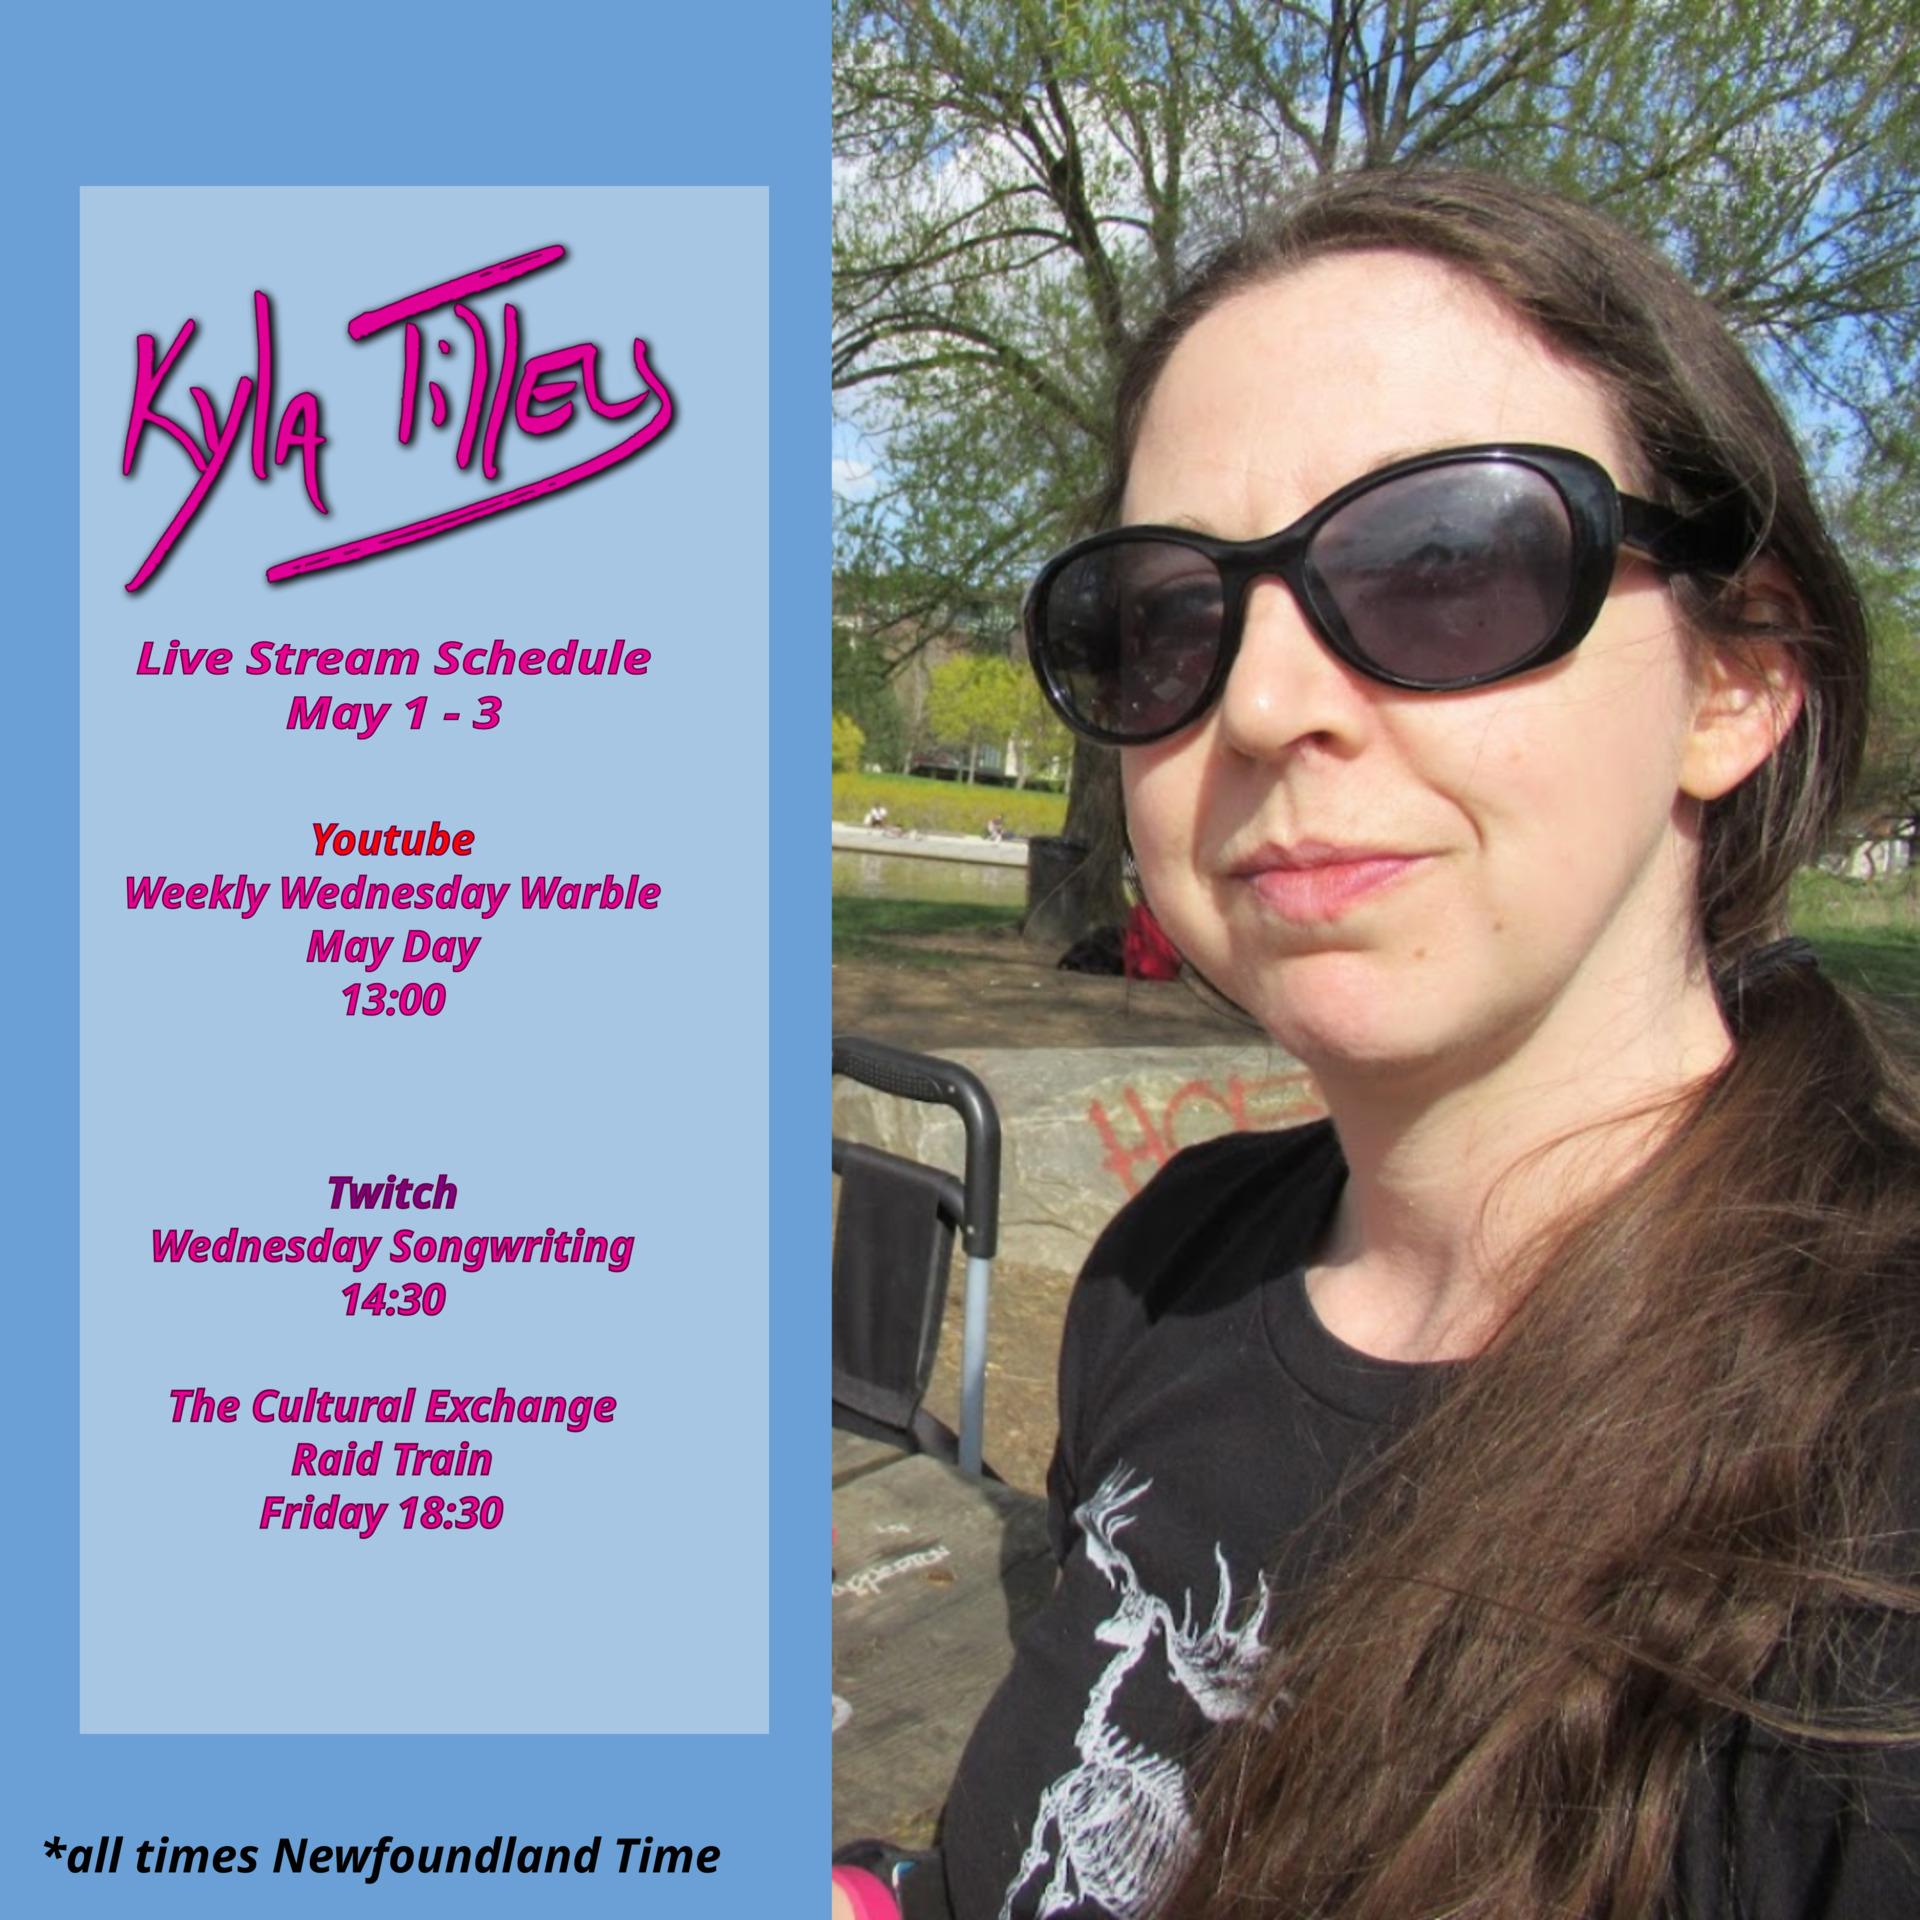 
A white woman wearing big movie star sunglasses and a t-shirt with a moose skeleton on it siting at a picnic table, next to a big water fountain in a lake. She is enjoying some snacks.

Kyla Tilley's live stream schedule May 1 - 3
On Youtube: May Day
13:00

On Twitch:
Wednesday Songwriting 14:30
The Cultural Exchange Raid Train Friday 18:30

All times posted in UTC -2:30
 

